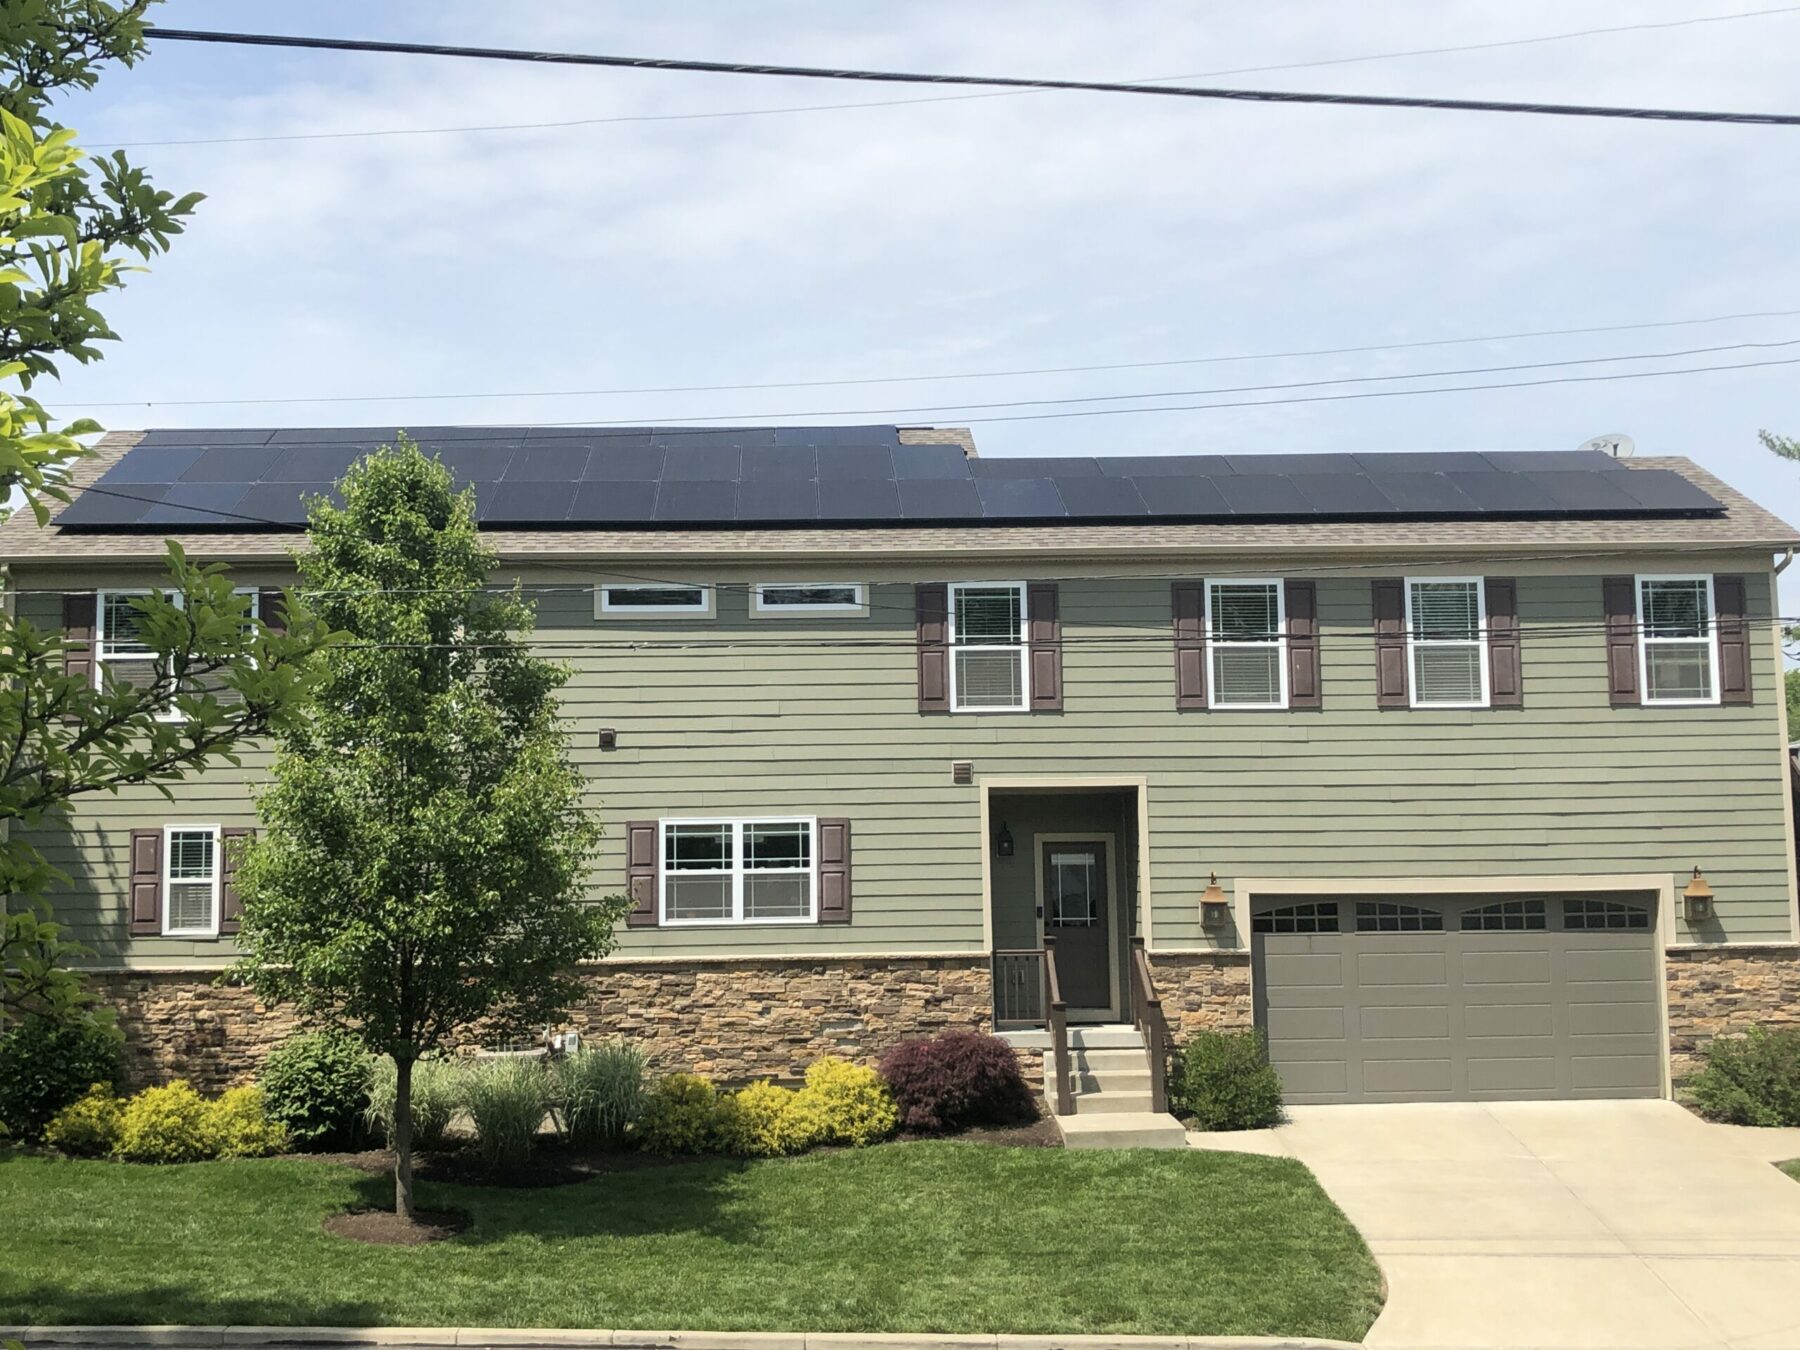 installing residential solar panels for a home